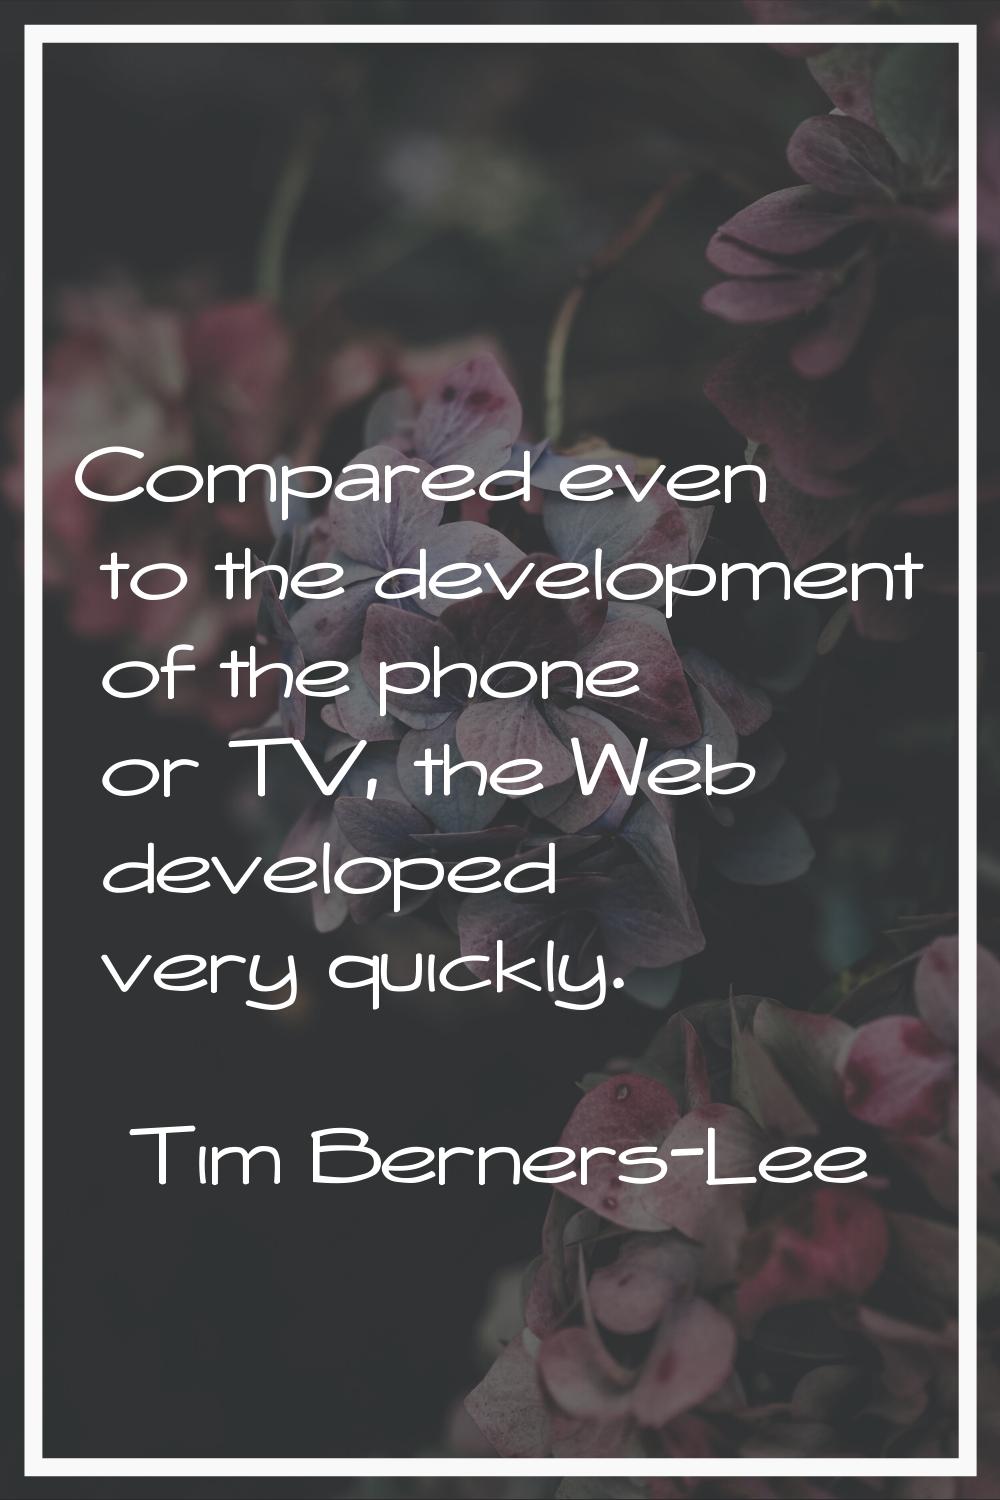 Compared even to the development of the phone or TV, the Web developed very quickly.